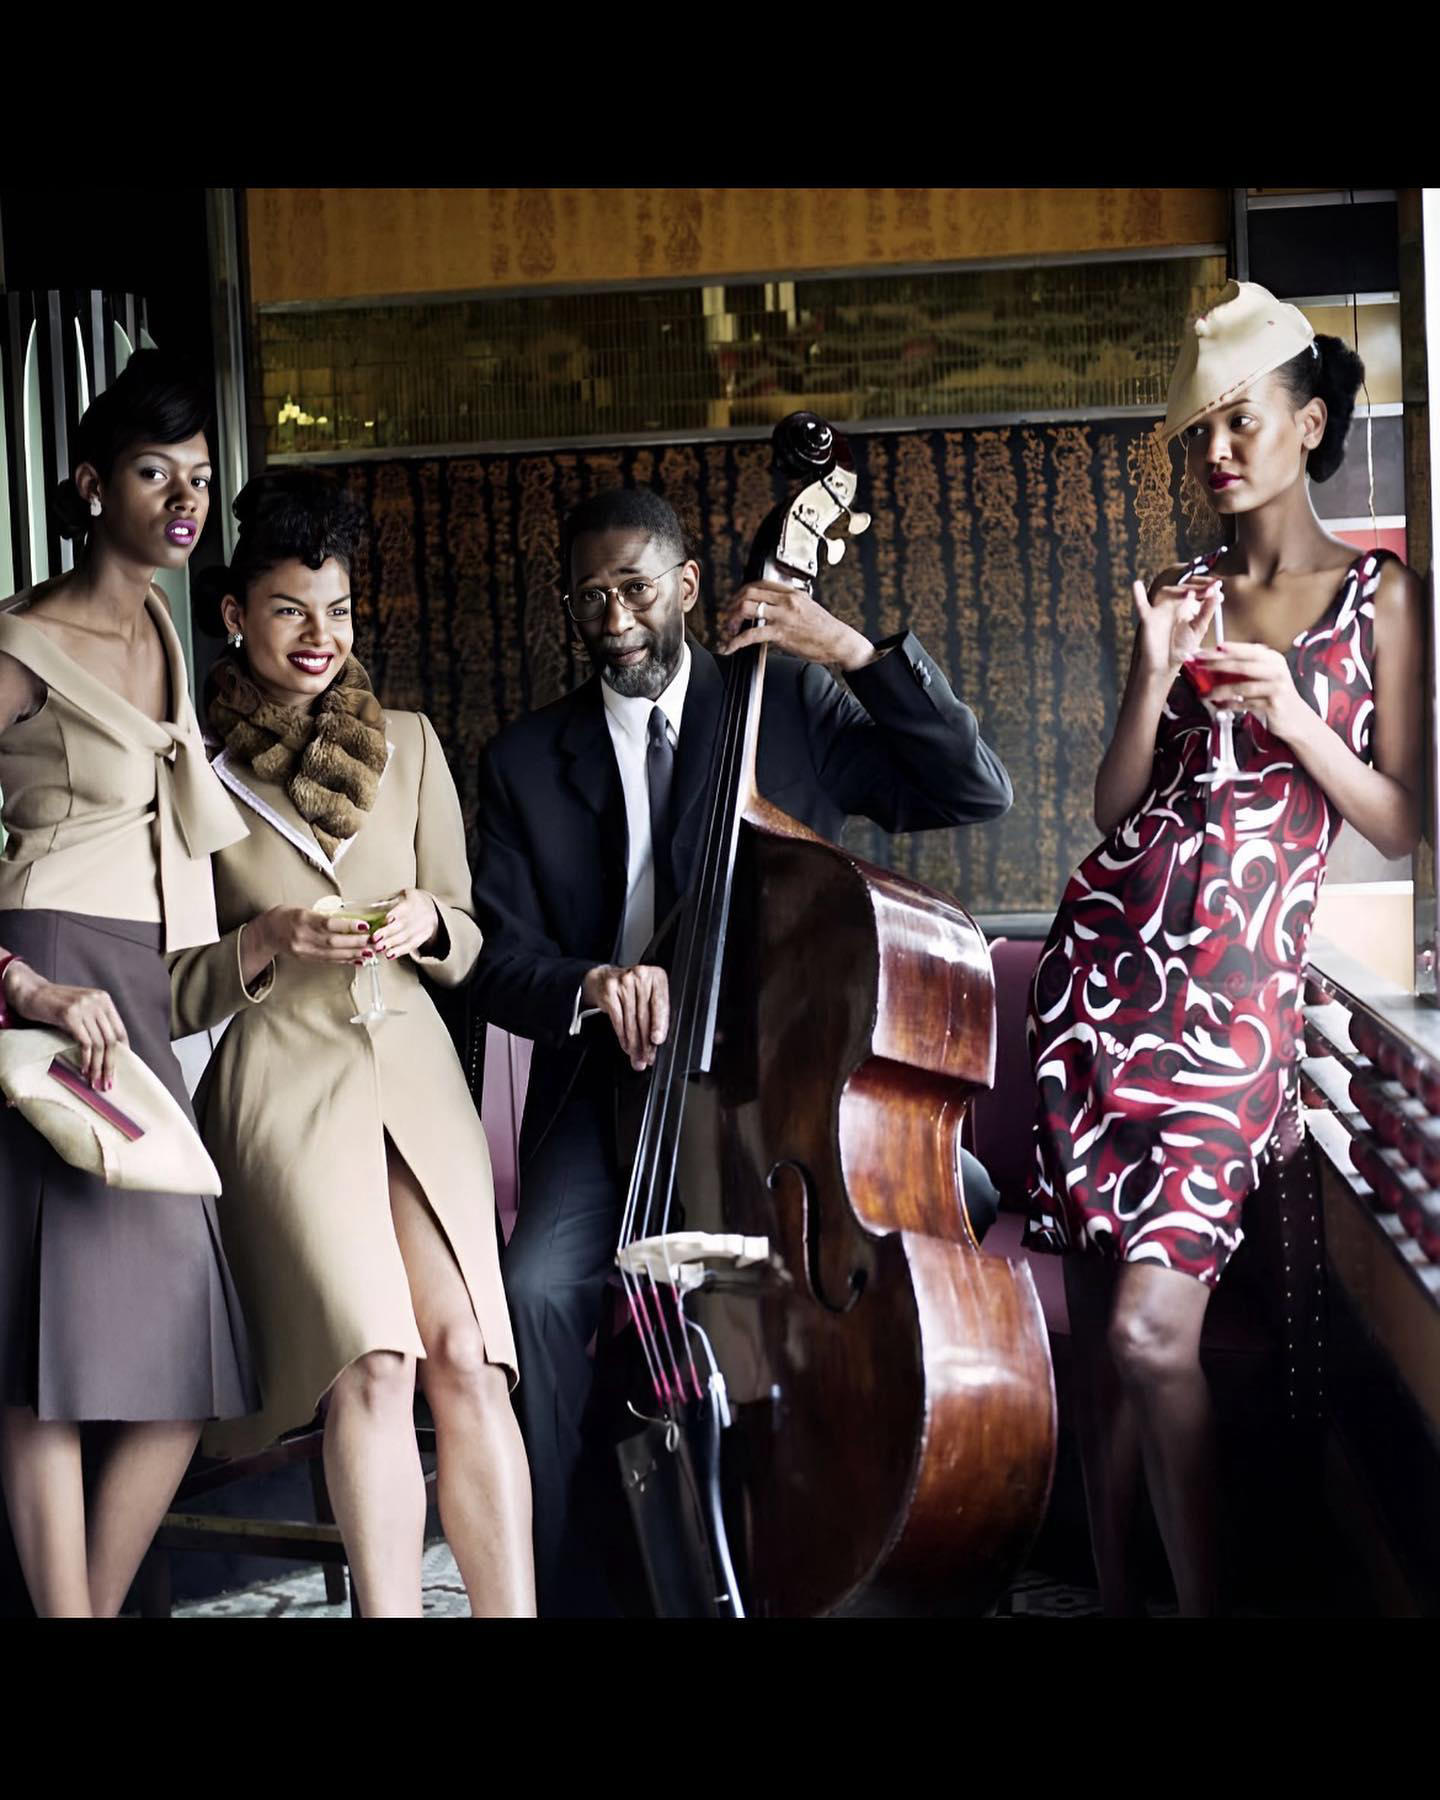 Jazz, Blues And Lounge Music - What a great shot by Arthur Elgort for the New Yorker magazine in Sep